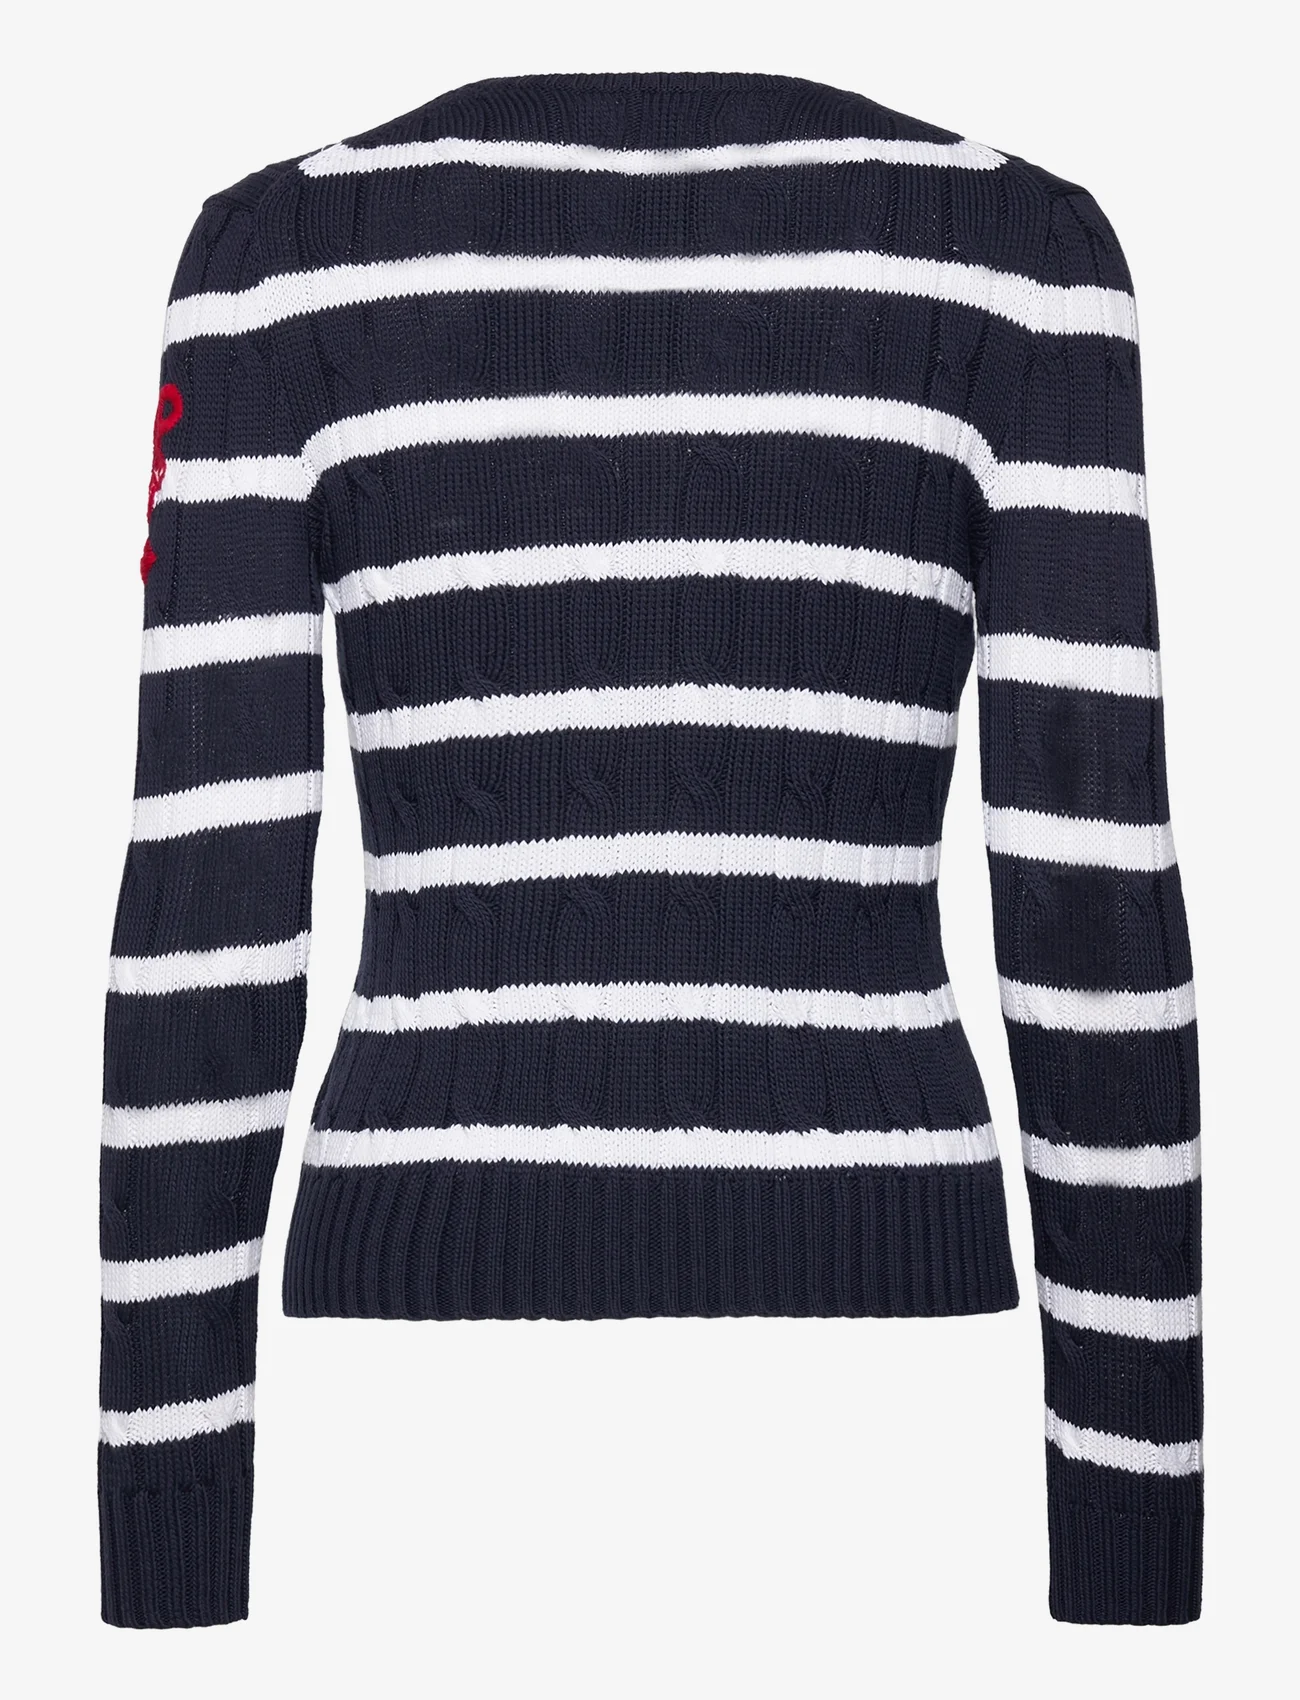 Polo Ralph Lauren - Anchor-Motif Cable Cotton Sweater - jumpers - hunter navy/white - 1